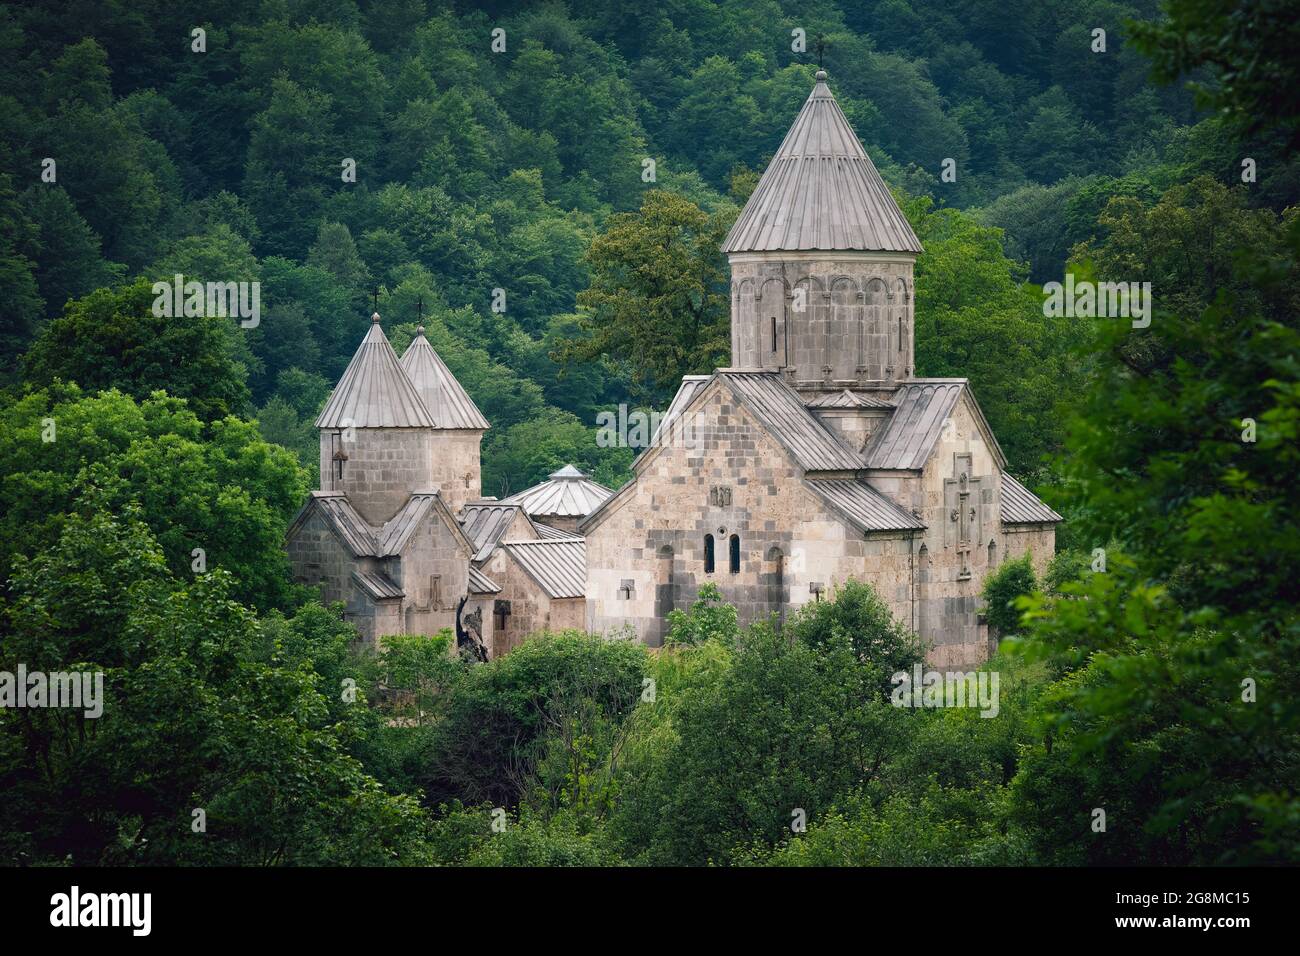 Haghartsin is a 13th-century monastery located near the town of Dilijan in the Tavush Province of Armenia. Was built between 10th and 13th centuries. Stock Photo